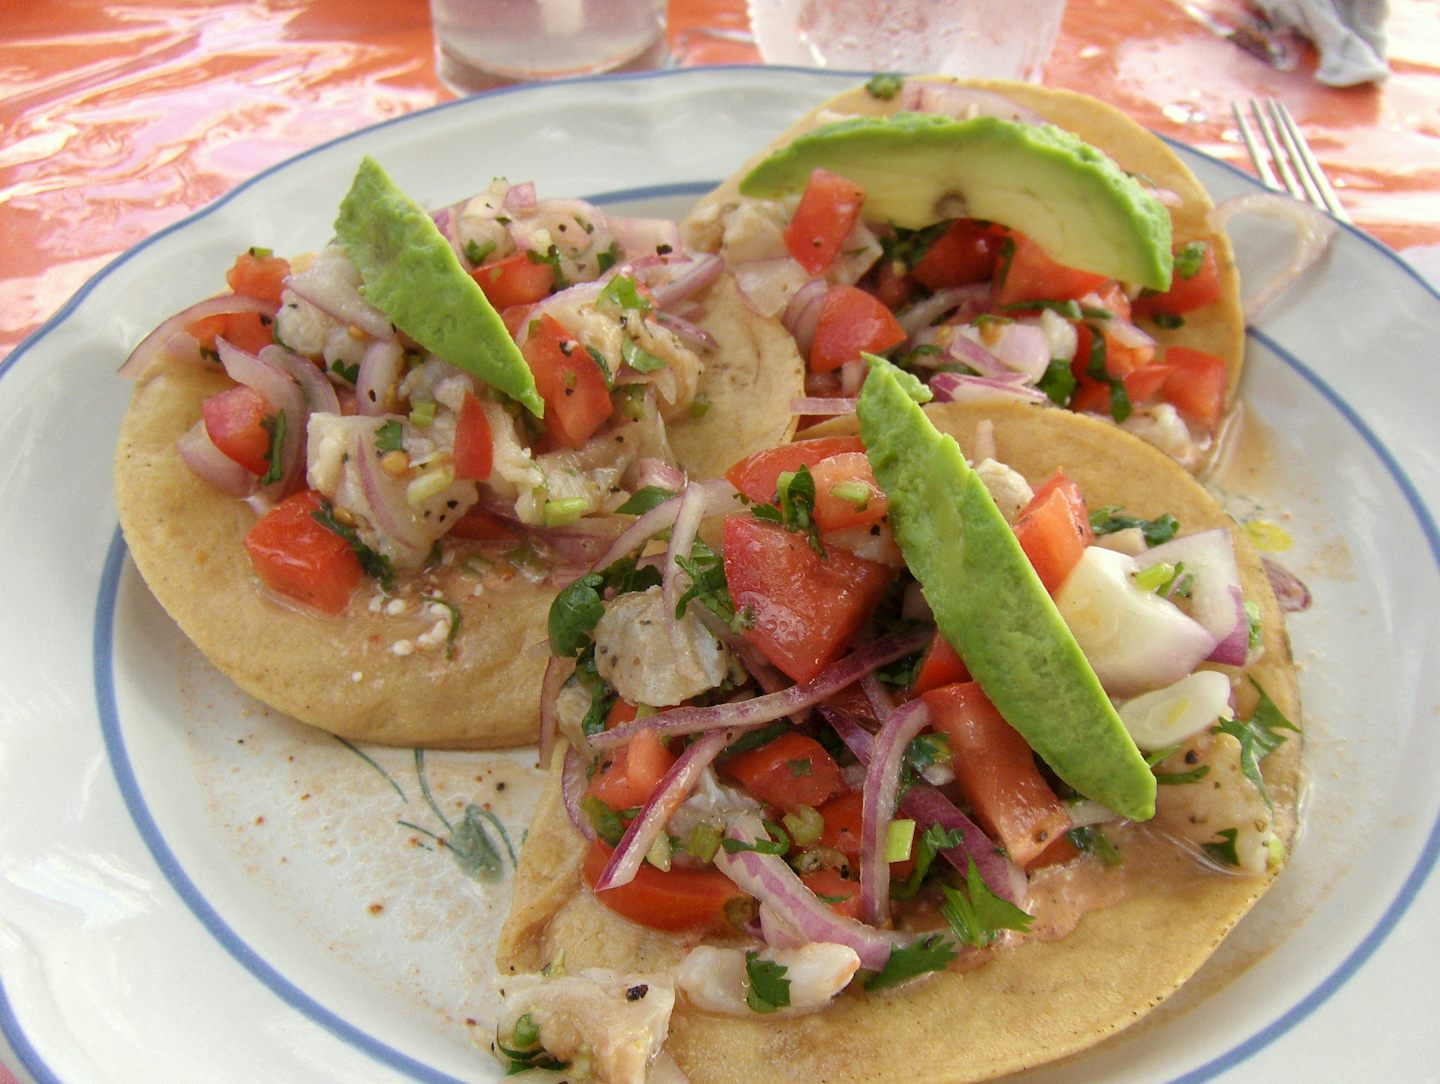 This was what my 3 ceviche tacos looked like from Caribbean Life at Costa Maya, served on the beach!